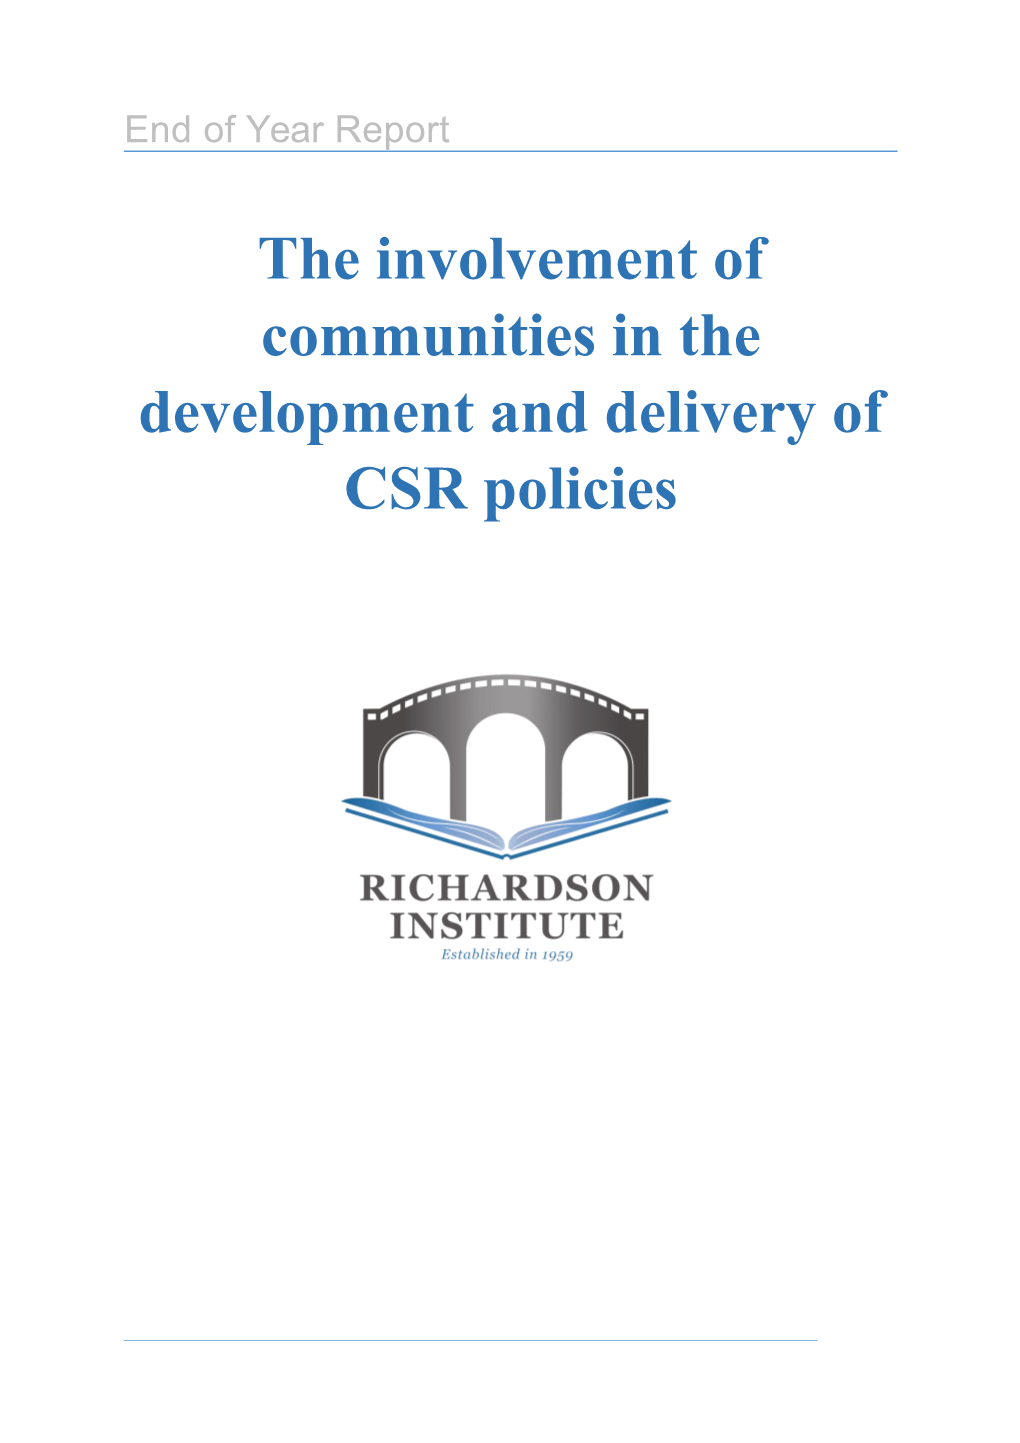 The Involvement of Communities in the Development and Delivery of CSR Policies